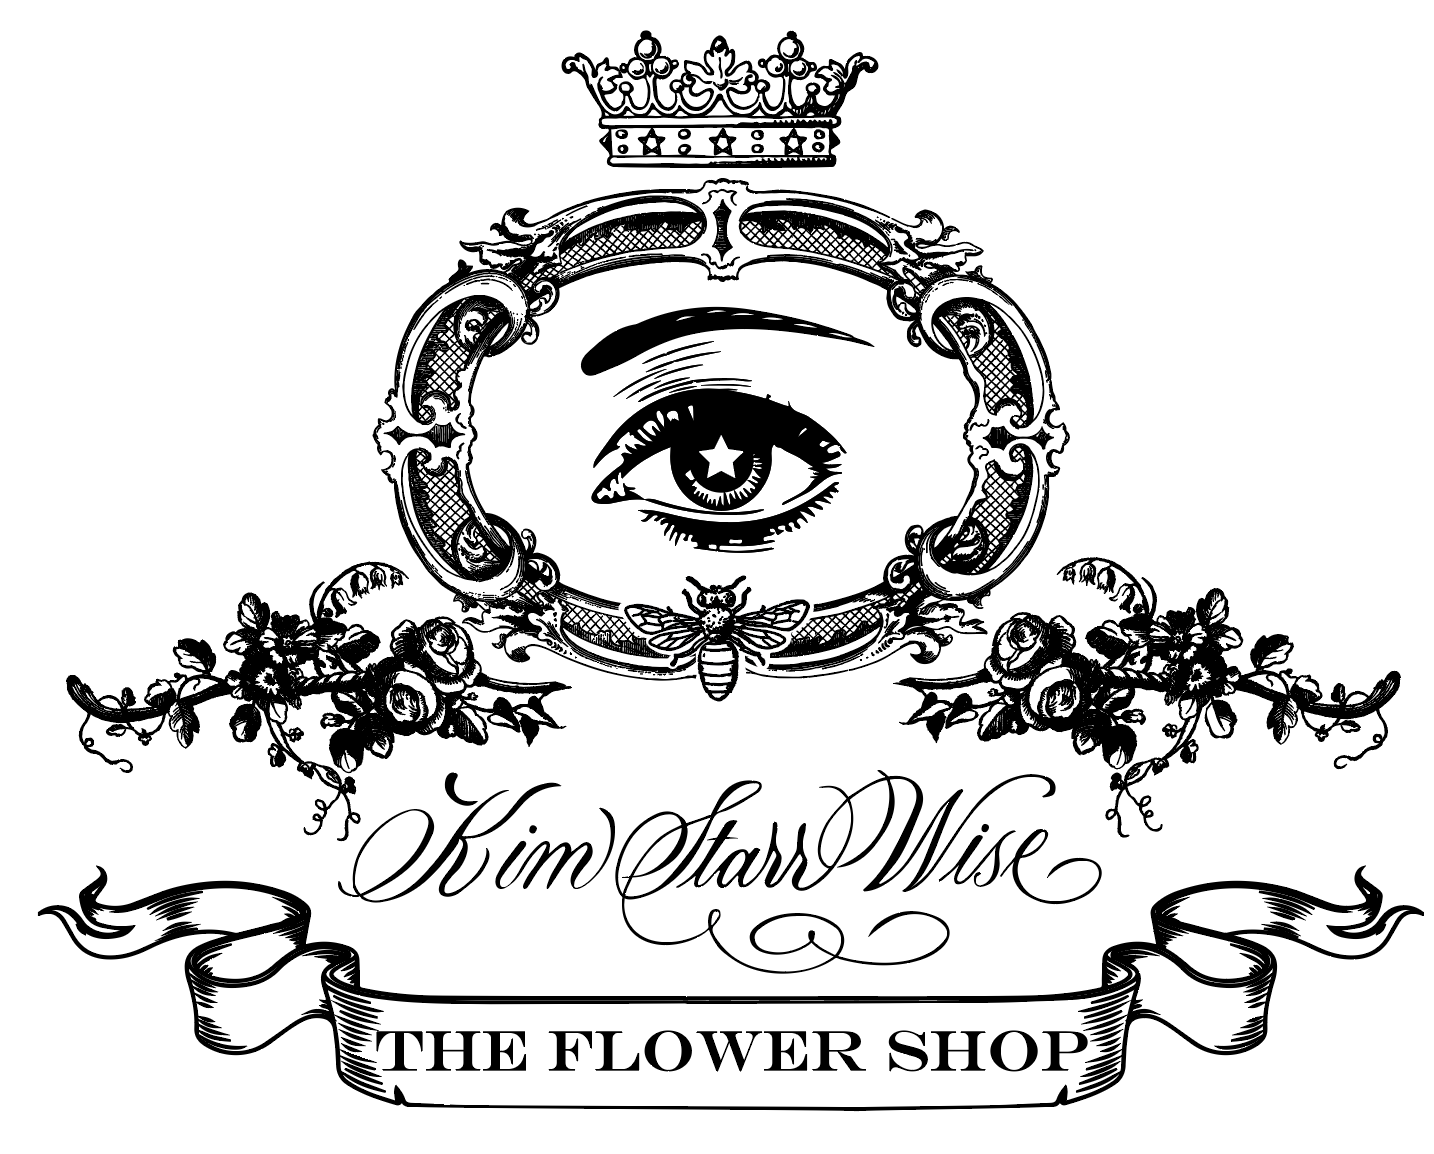 The Flower Shop by Kim Starr Wise Logo